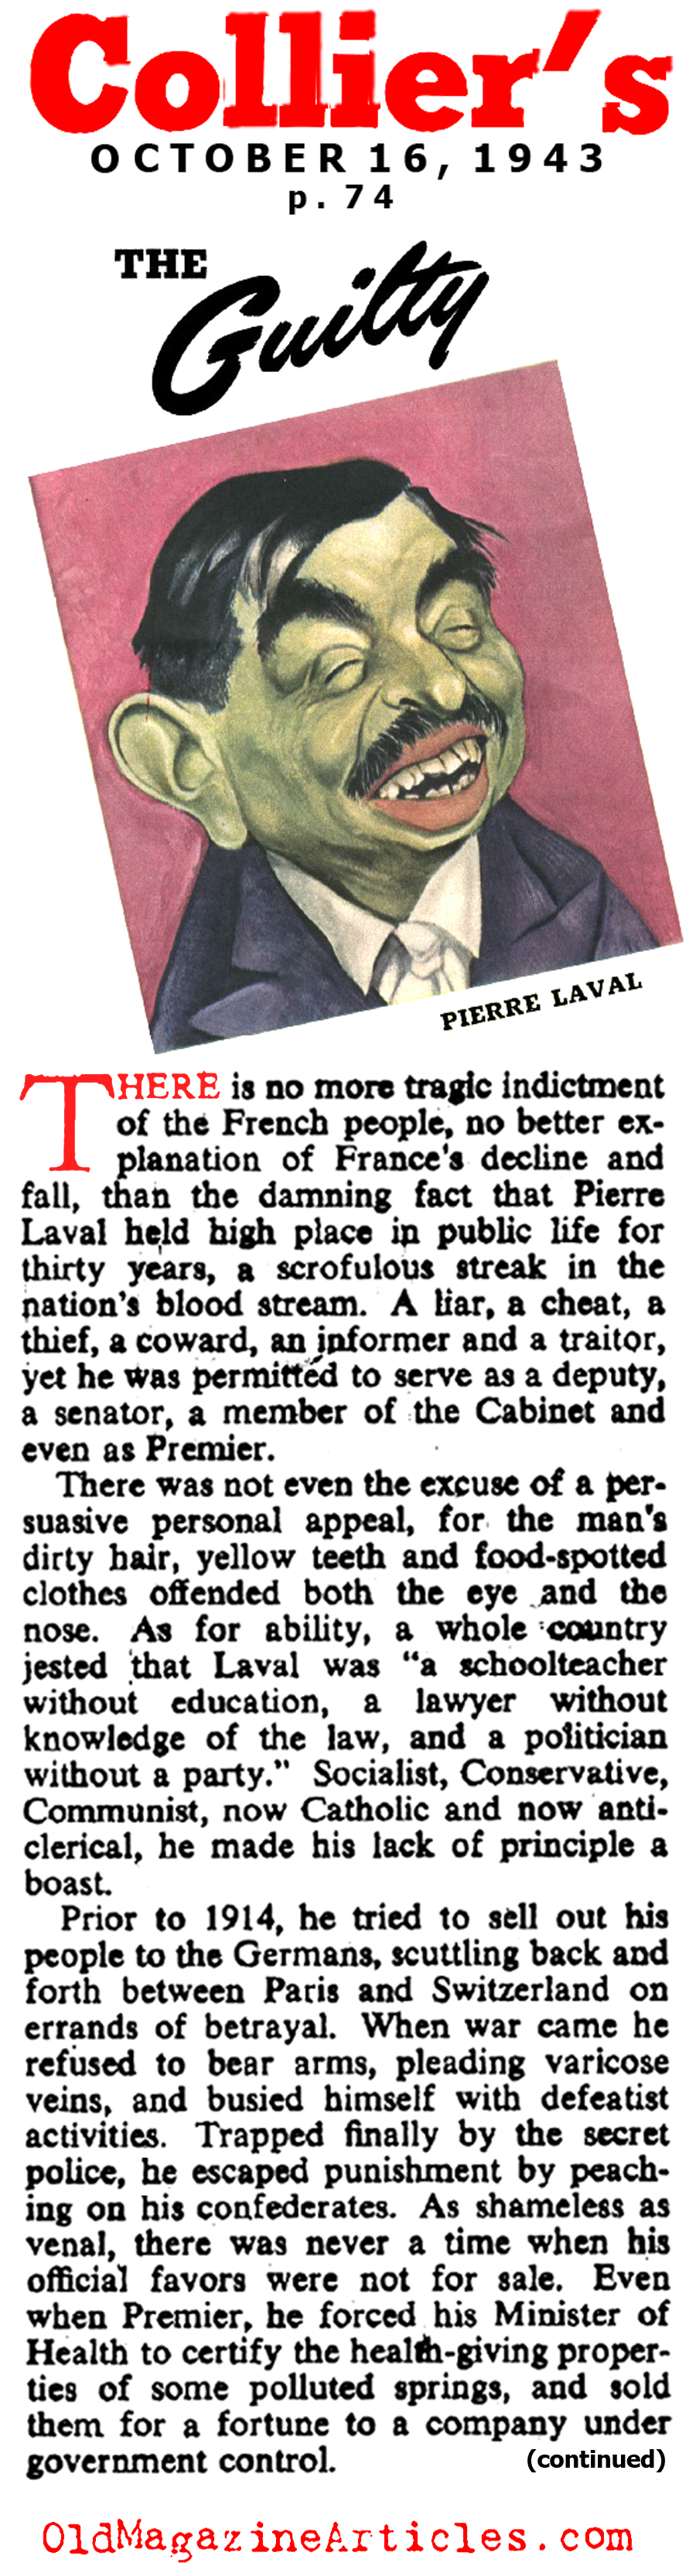 Pierre Laval: French Premier and Traitor (Collier's Magazine, 1943)